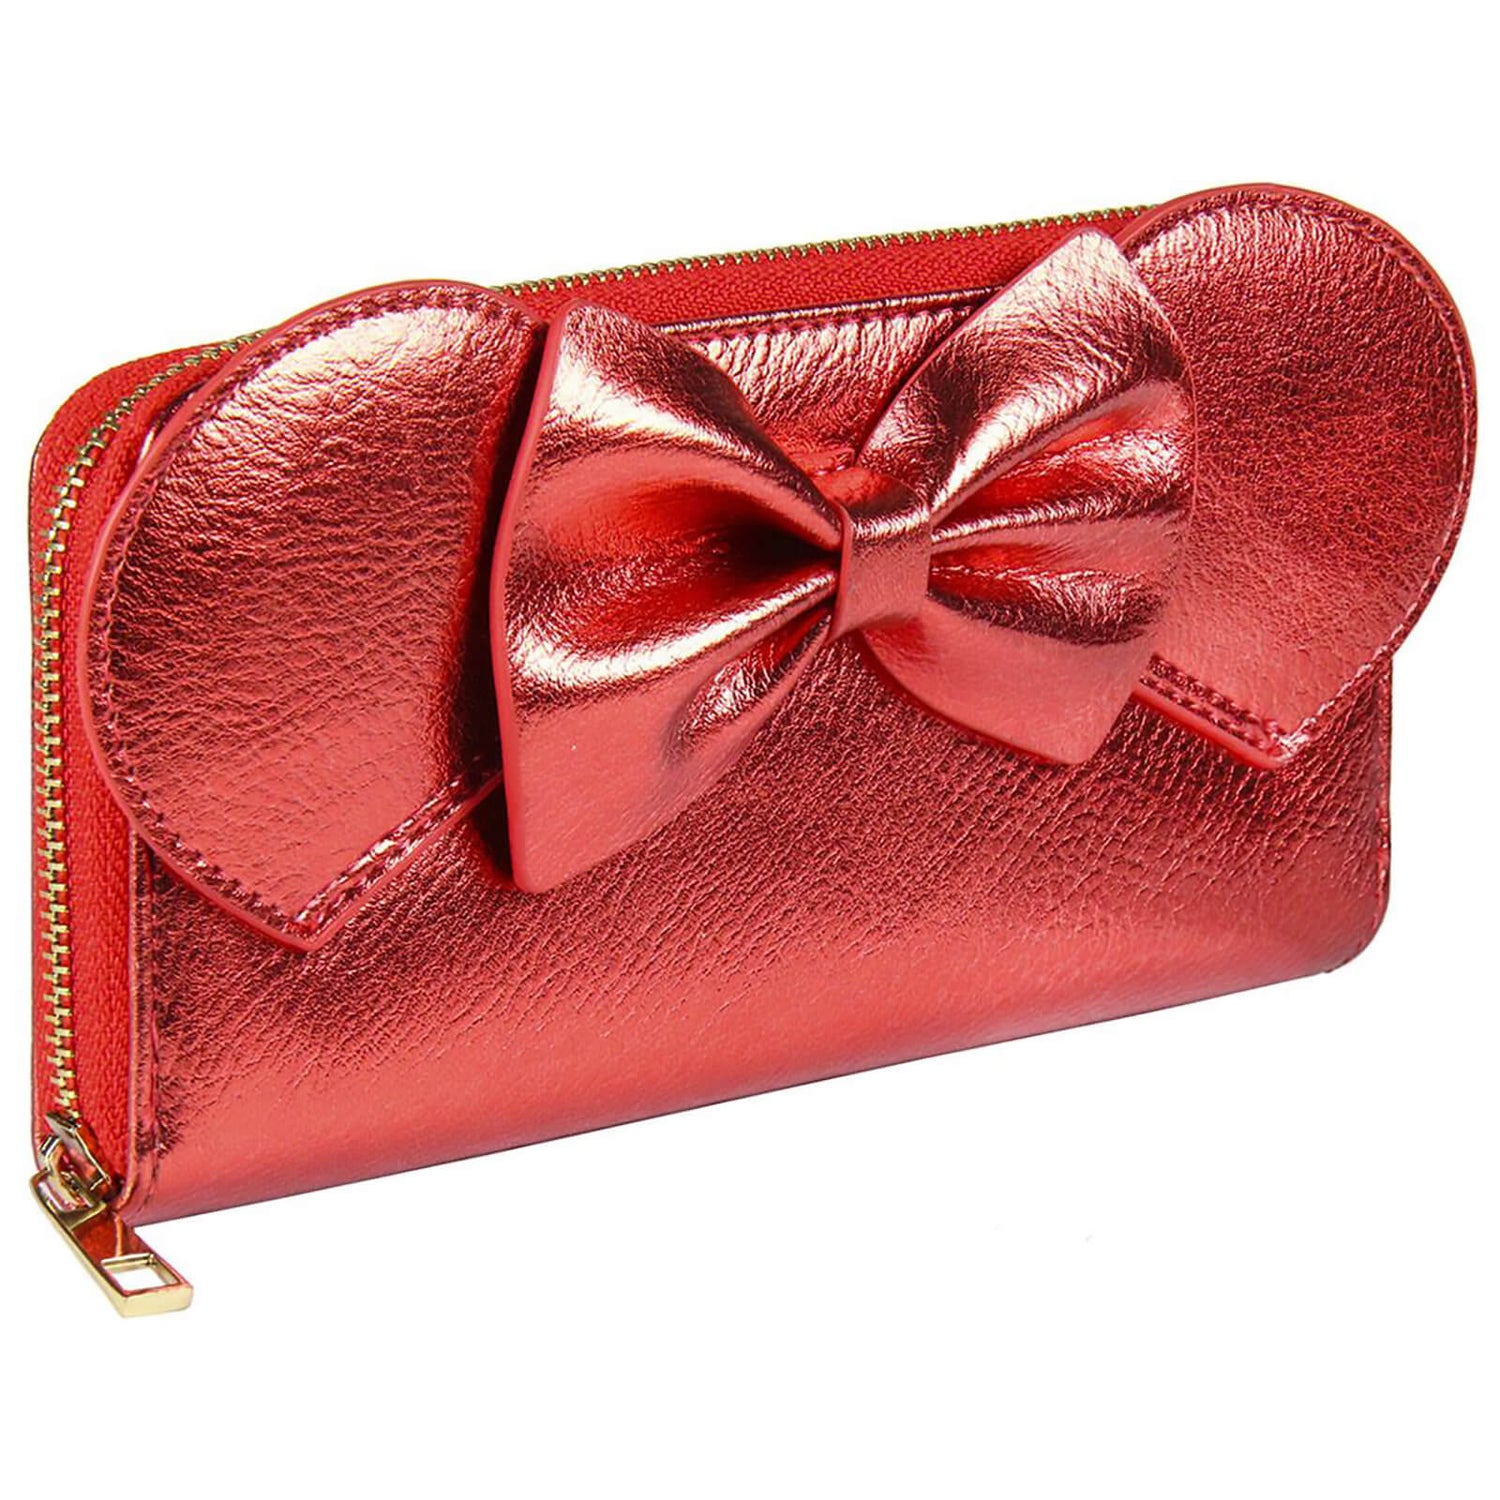 Disney Minnie Mouse Faux-Leather Purse Red